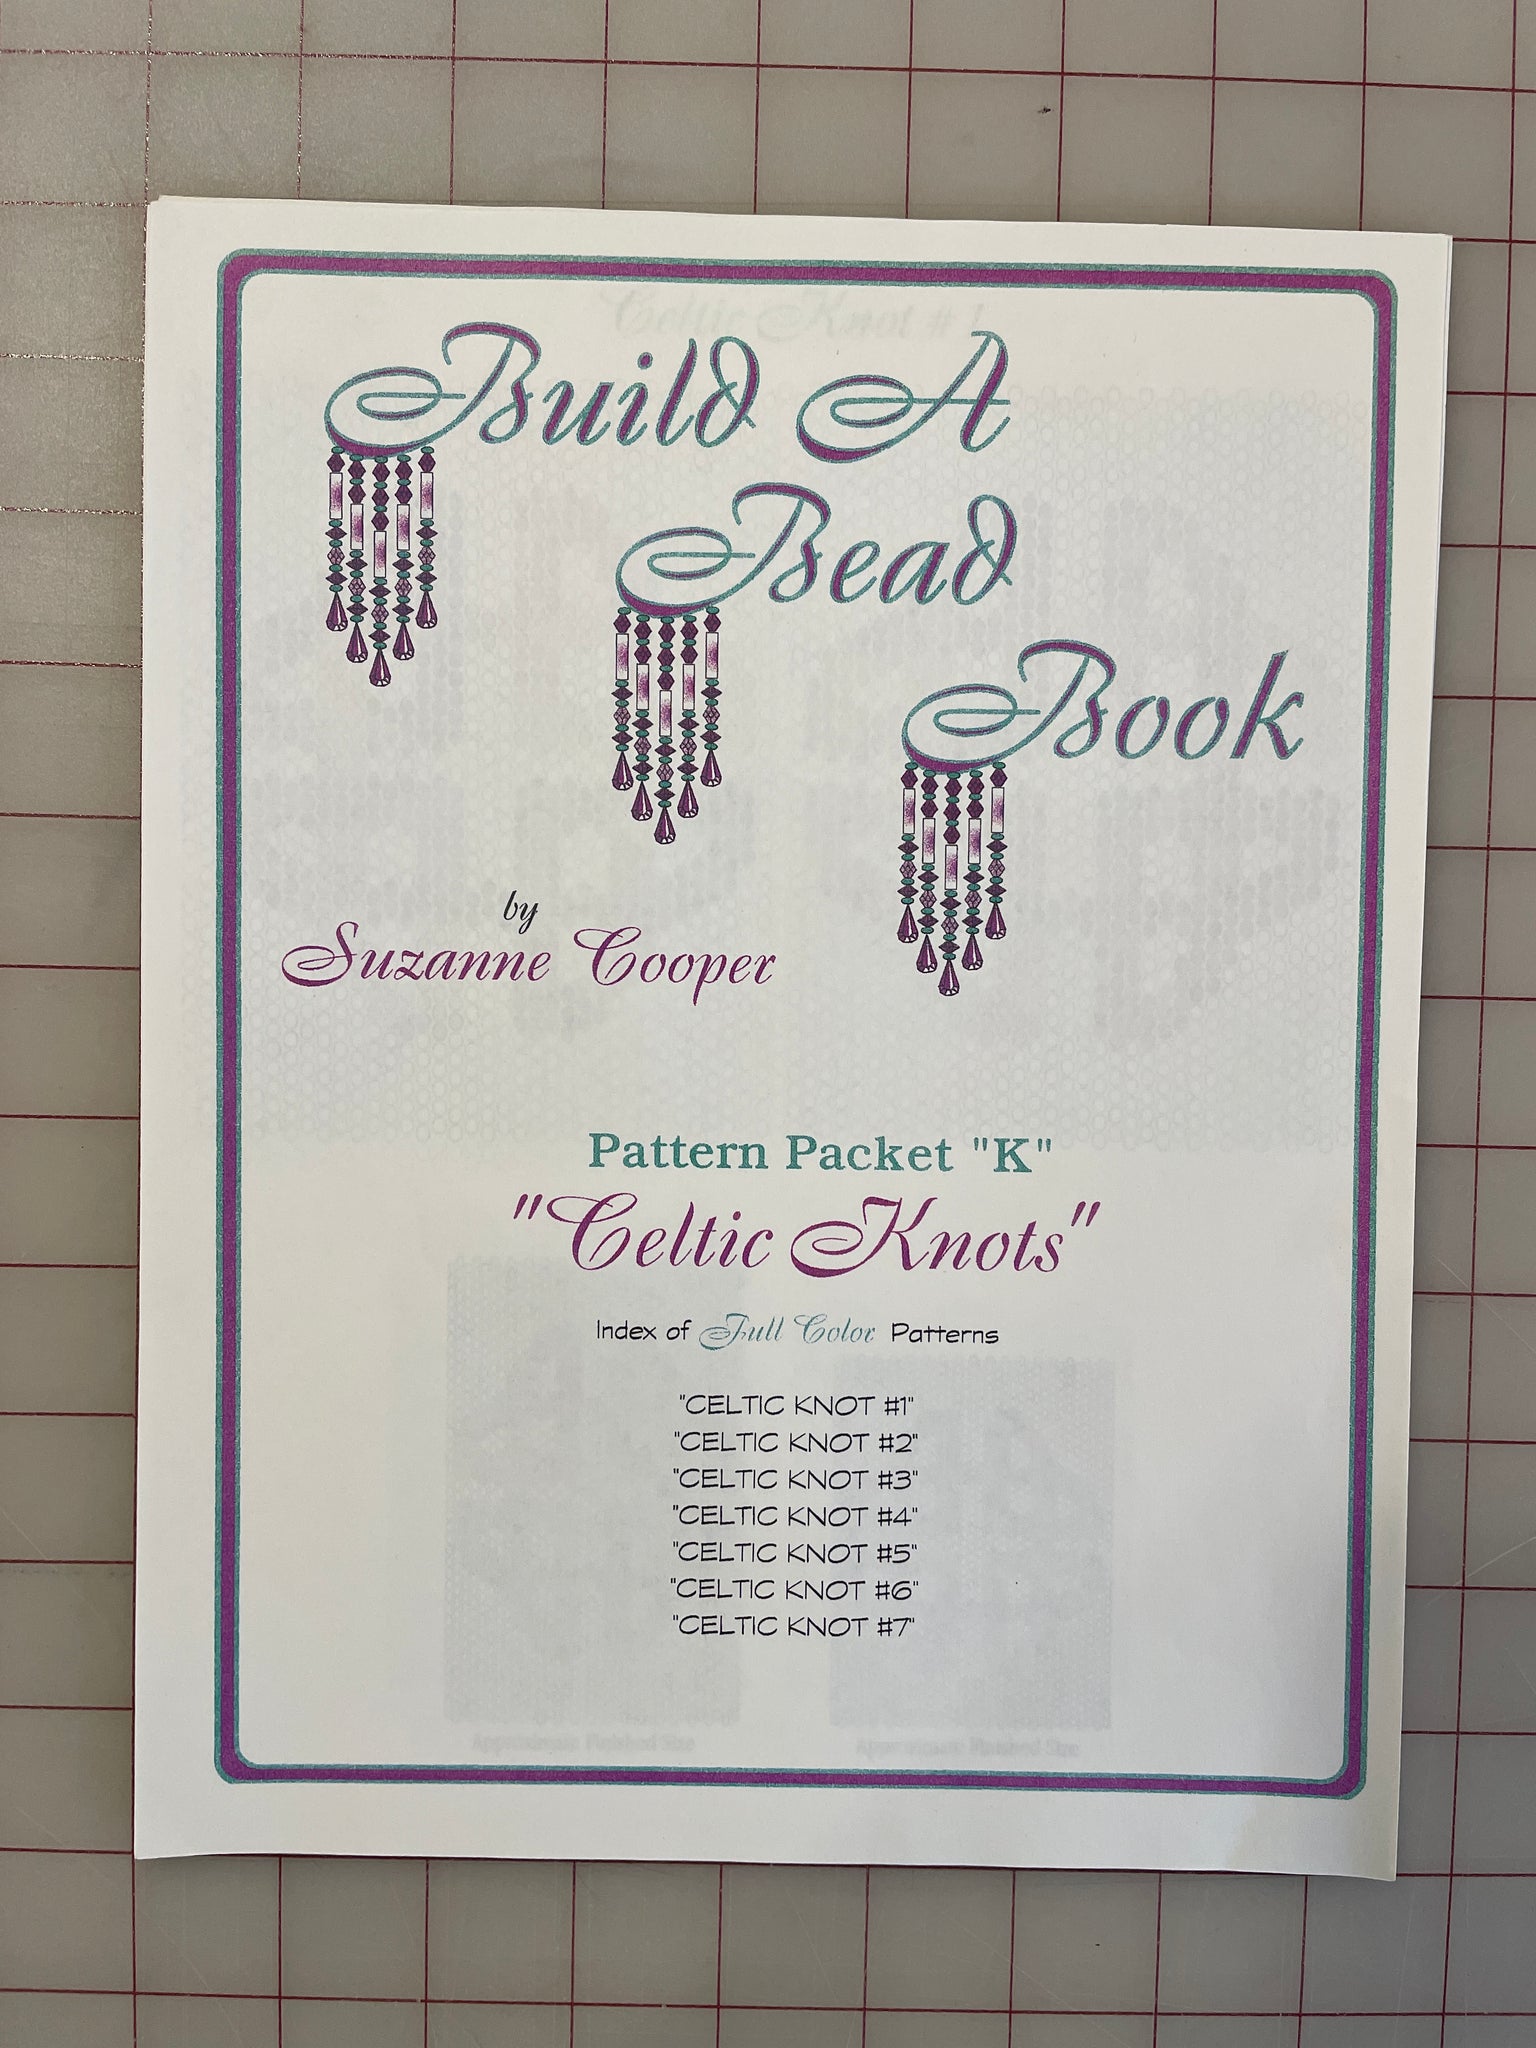 SALE Beading Pattern Book - "Build A Bead Book" Packet "K"